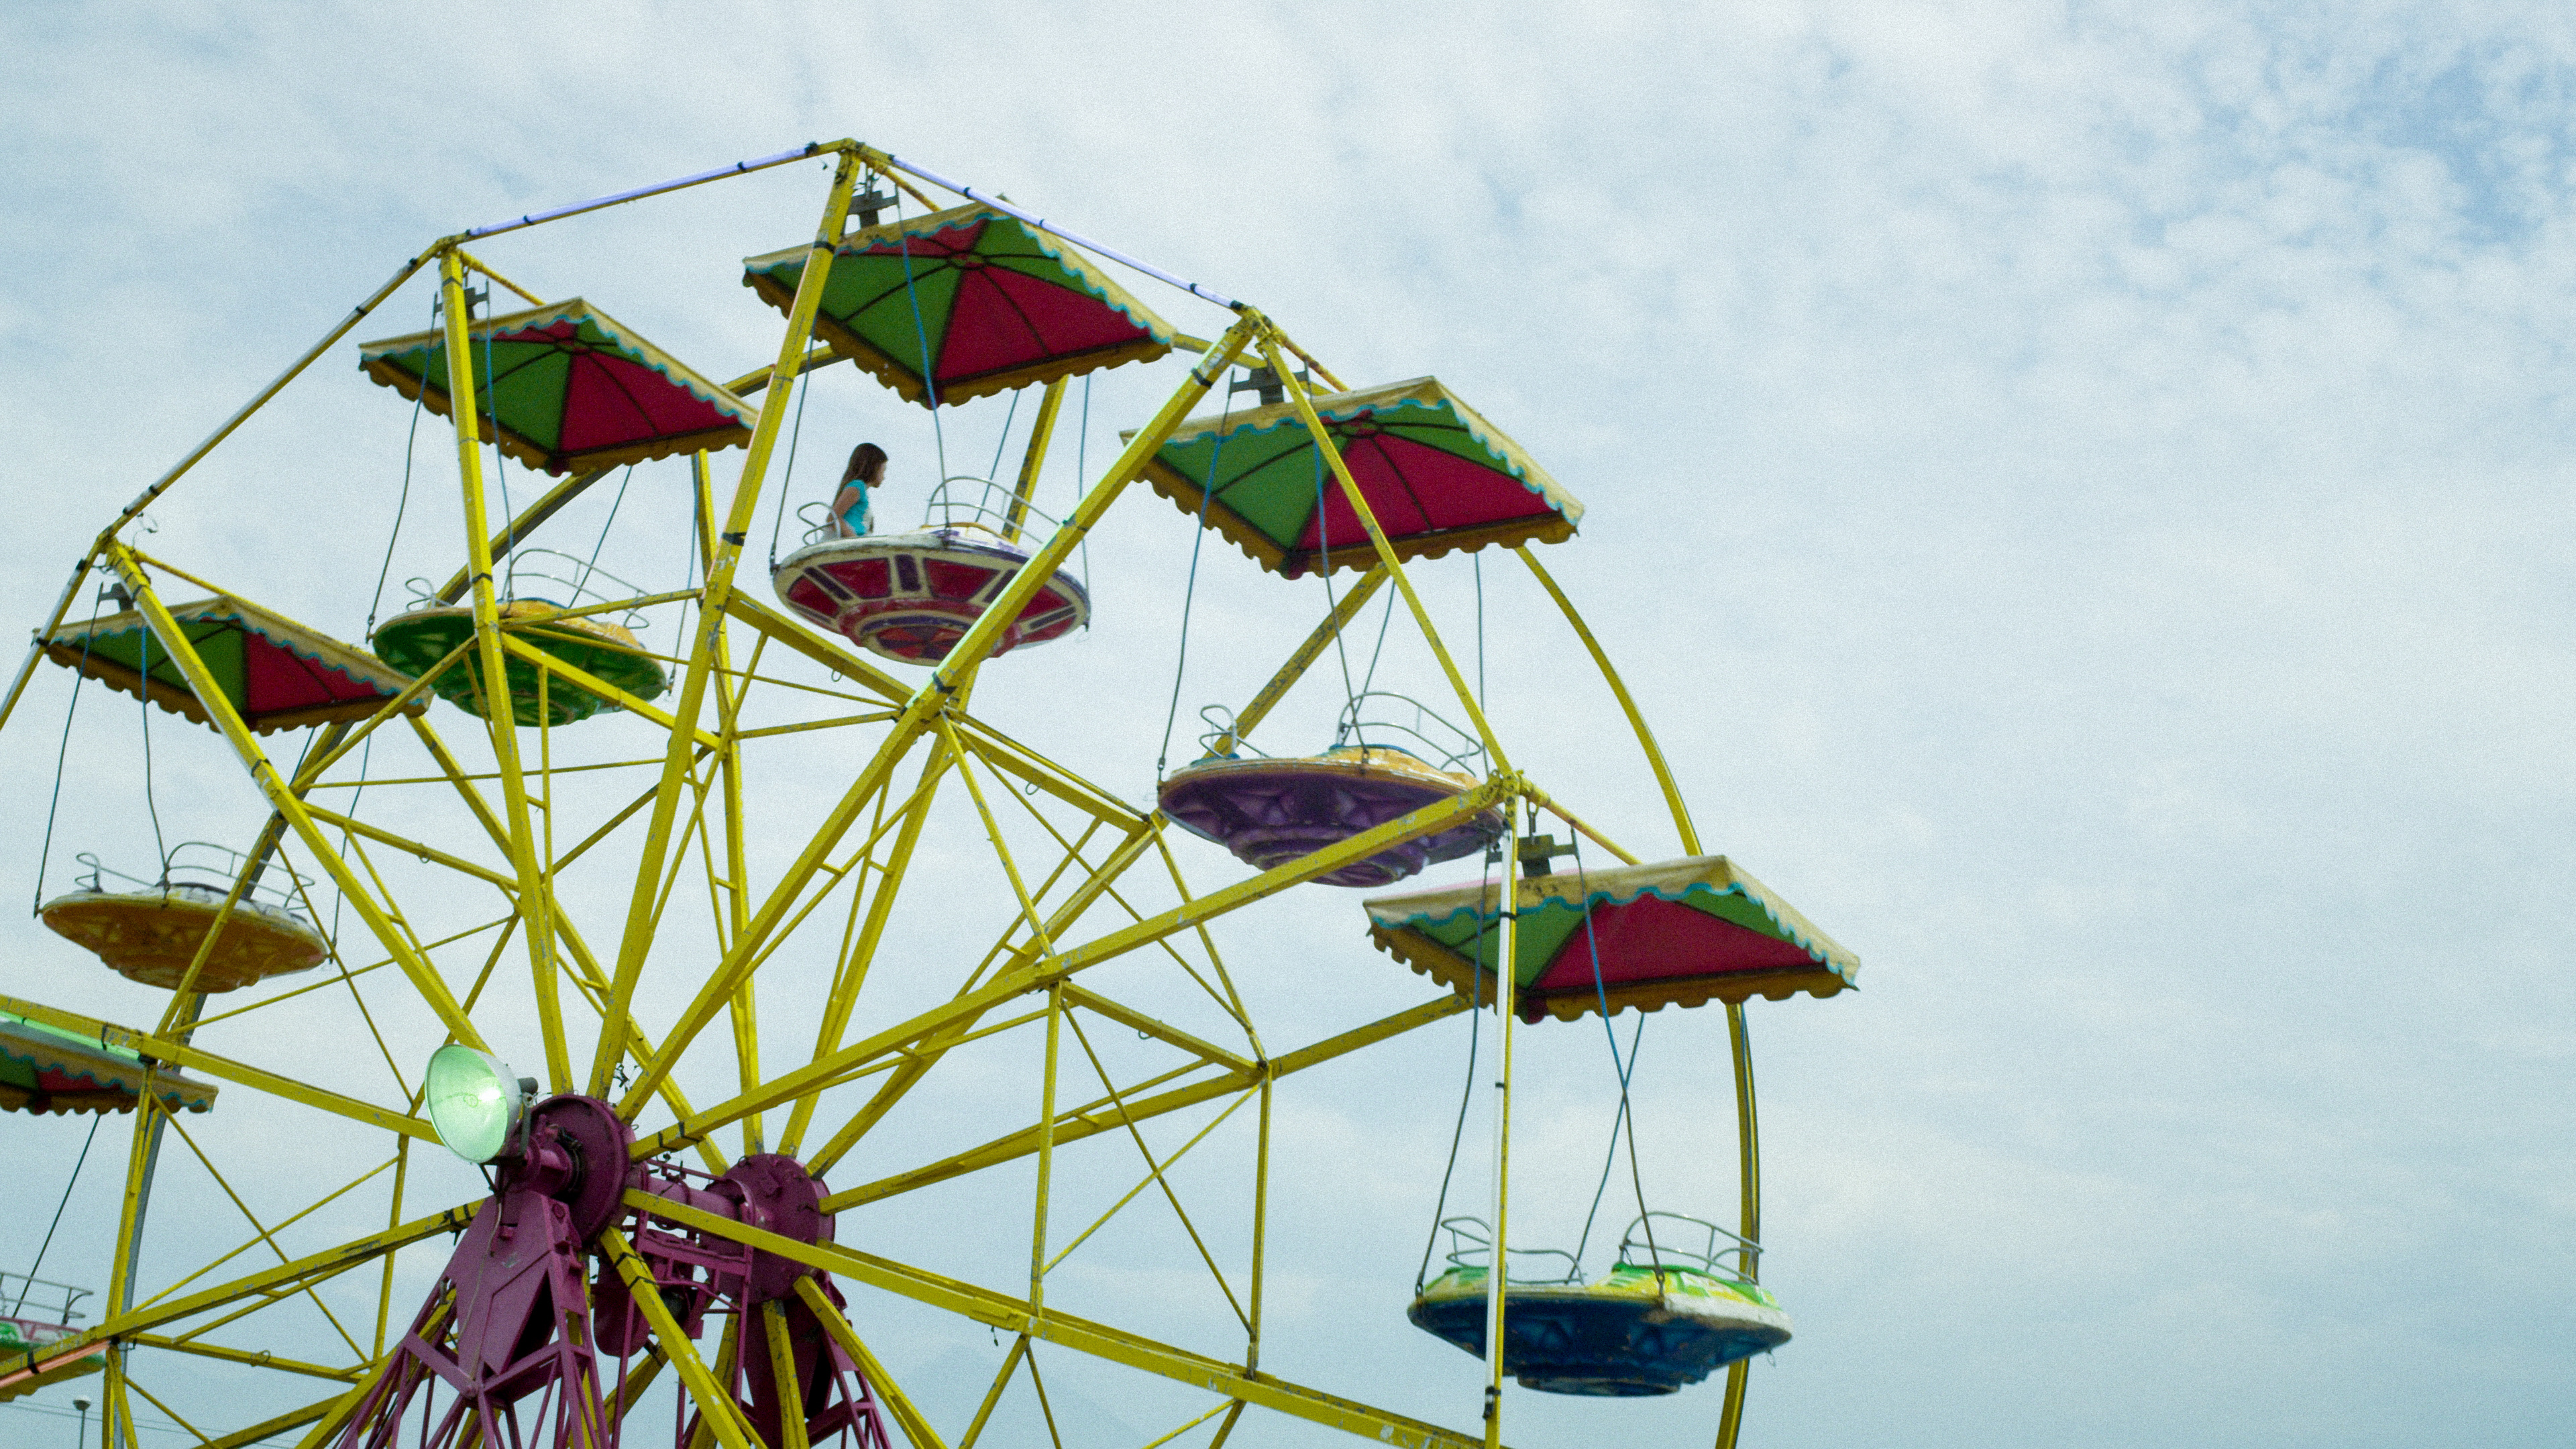 Fun Fair: An outdoor event featuring rides and exhibitions, Ferris Wheel. 3840x2160 4K Background.